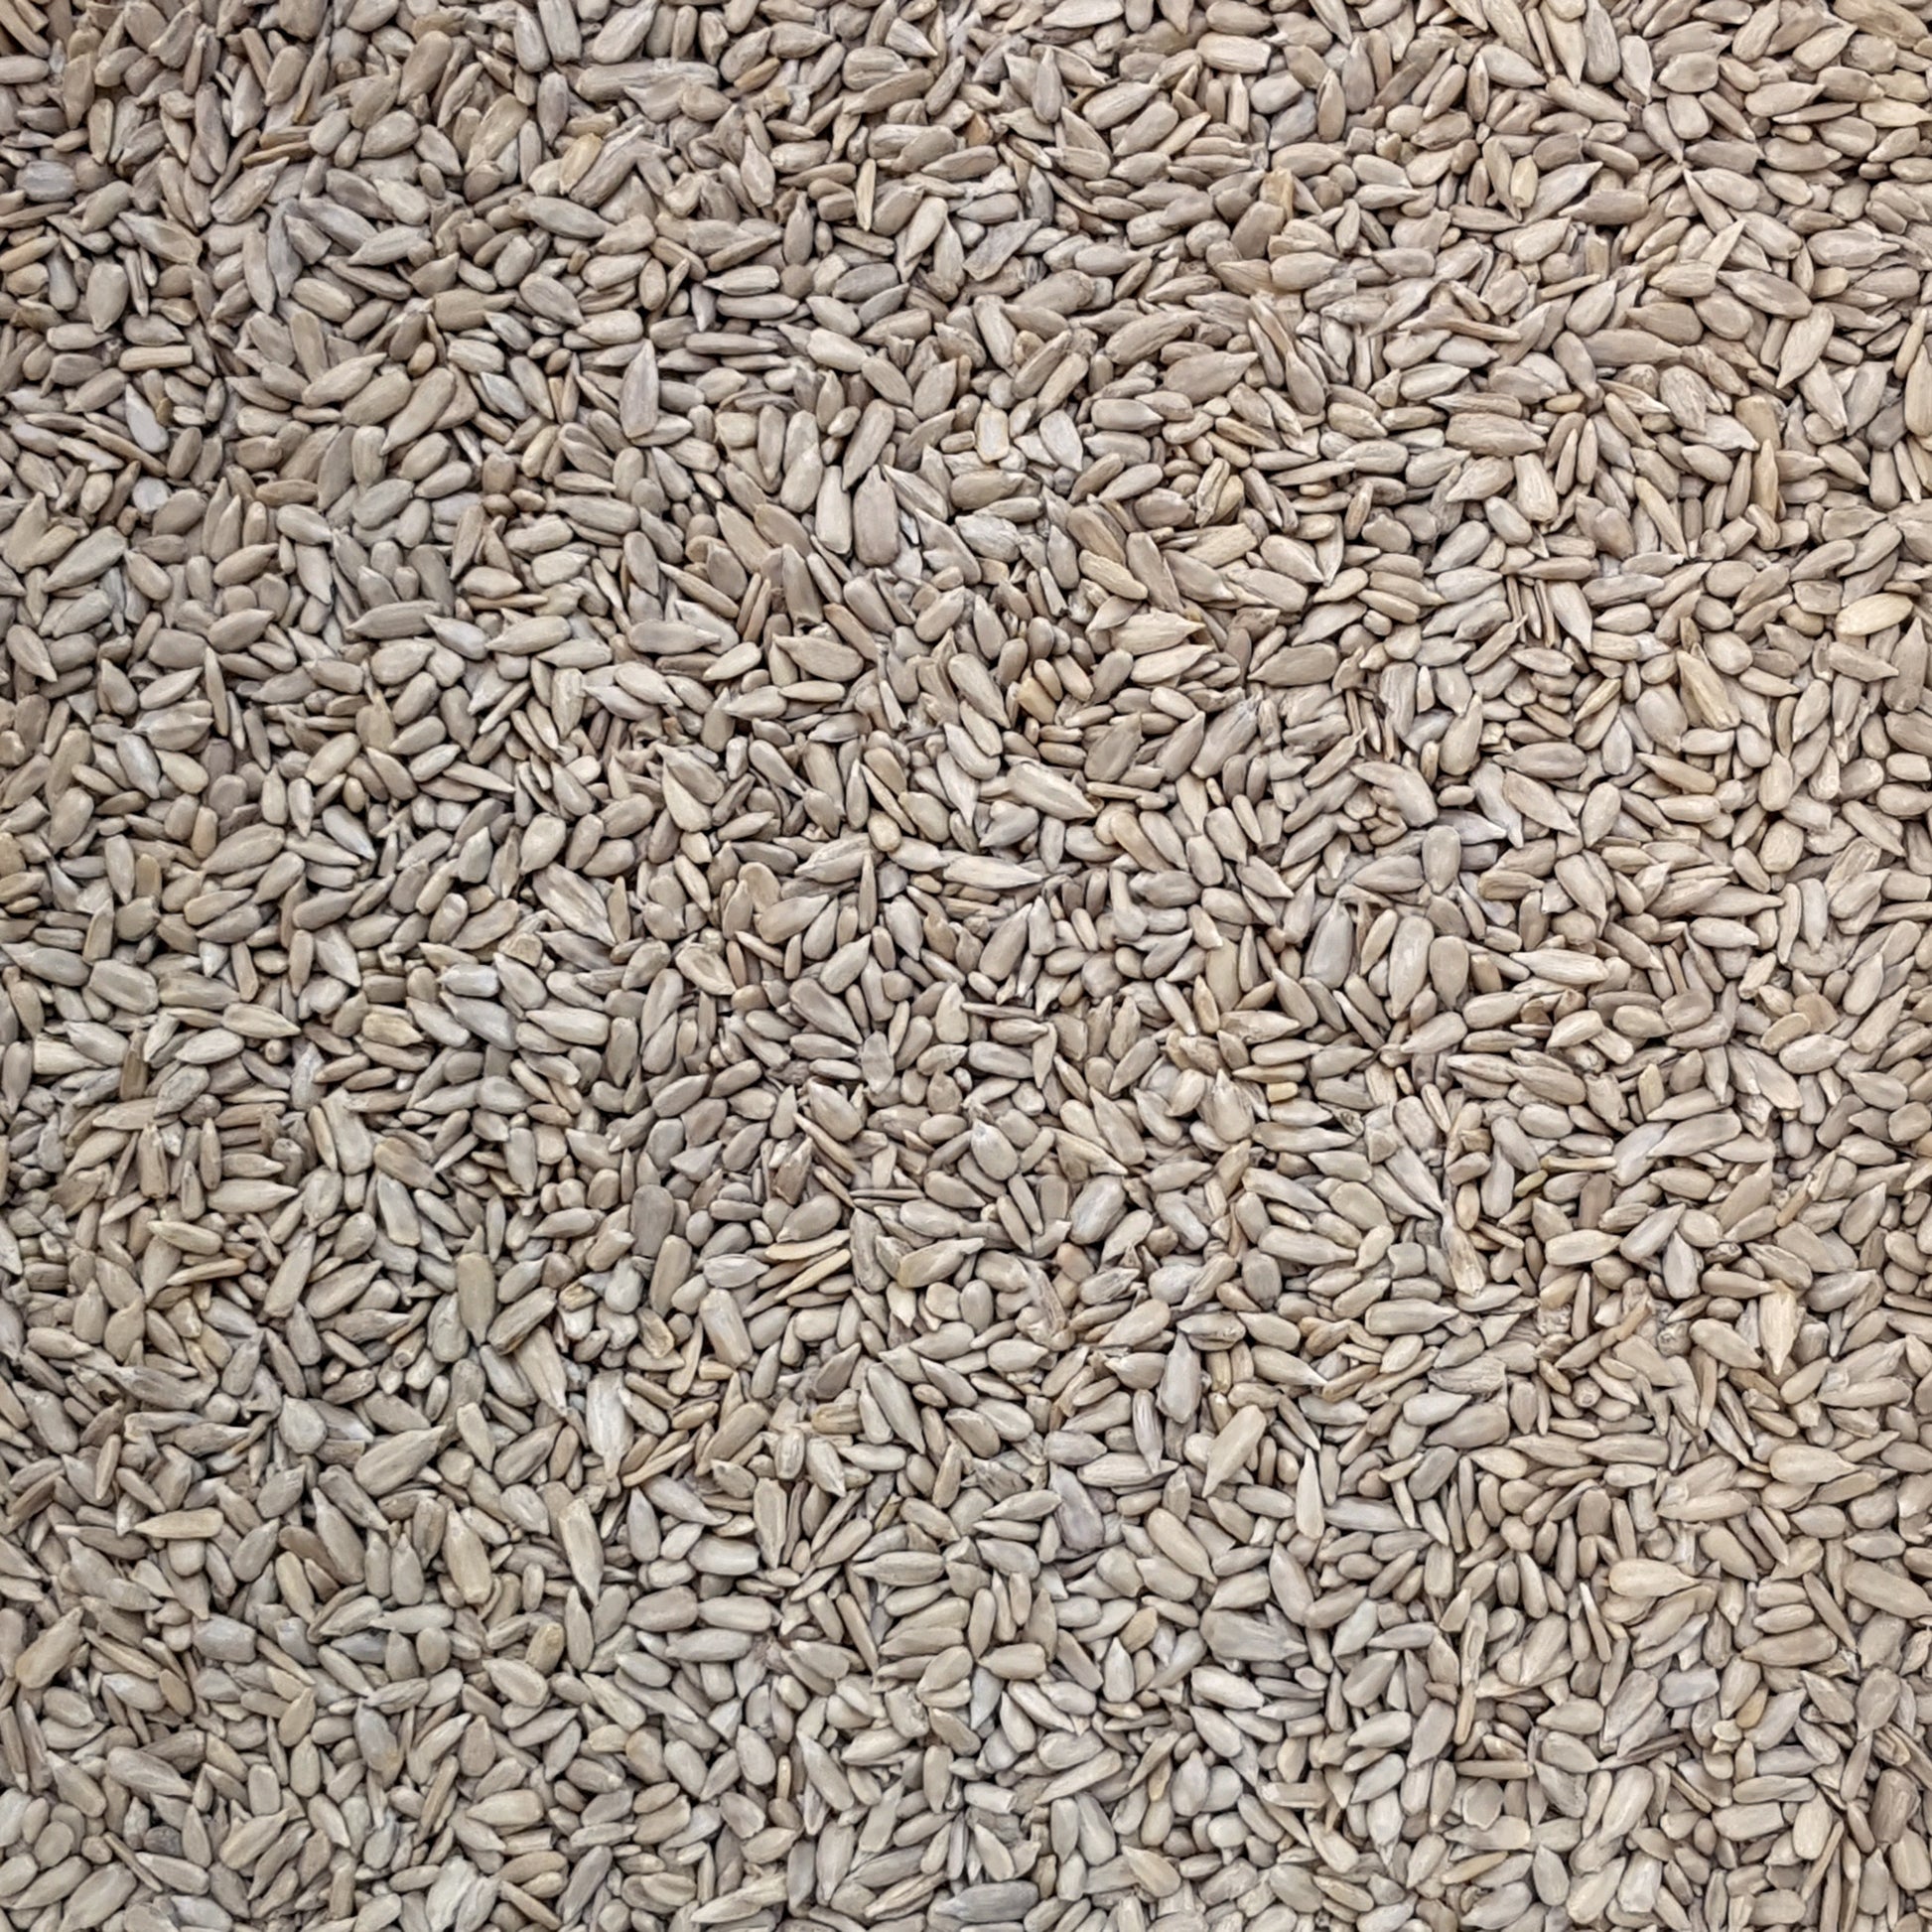 Full frame overhead image of BY NATURE Sunflower Seeds - hulled, raw, certified organic at source.